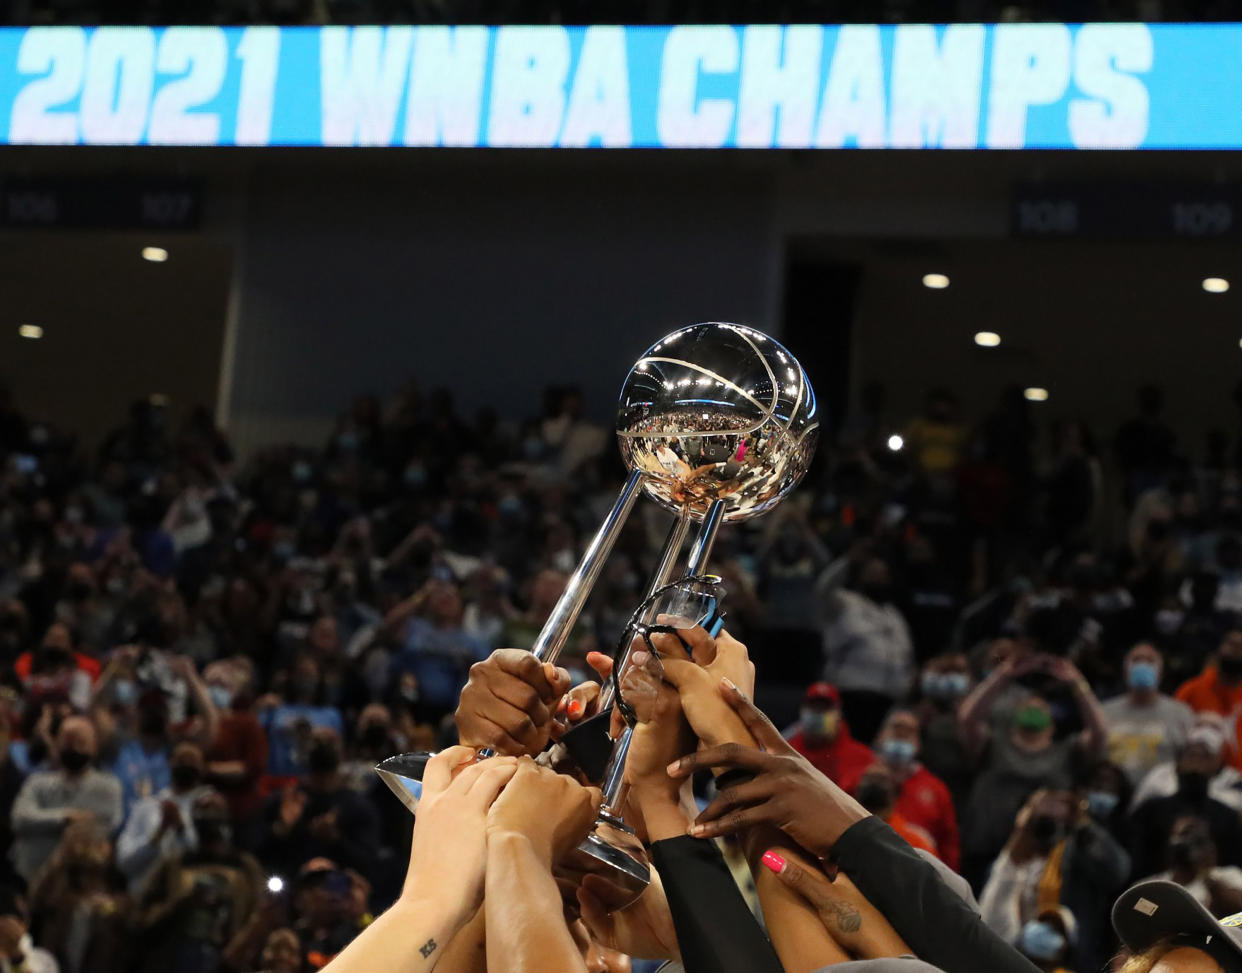 Chicago Sky players hold celebrate after winning the WNBA championship on Oct. 17, 2021, at Wintrust Arena in Chicago. (Stacey Wescott/Chicago Tribune/Tribune News Service via Getty Images)